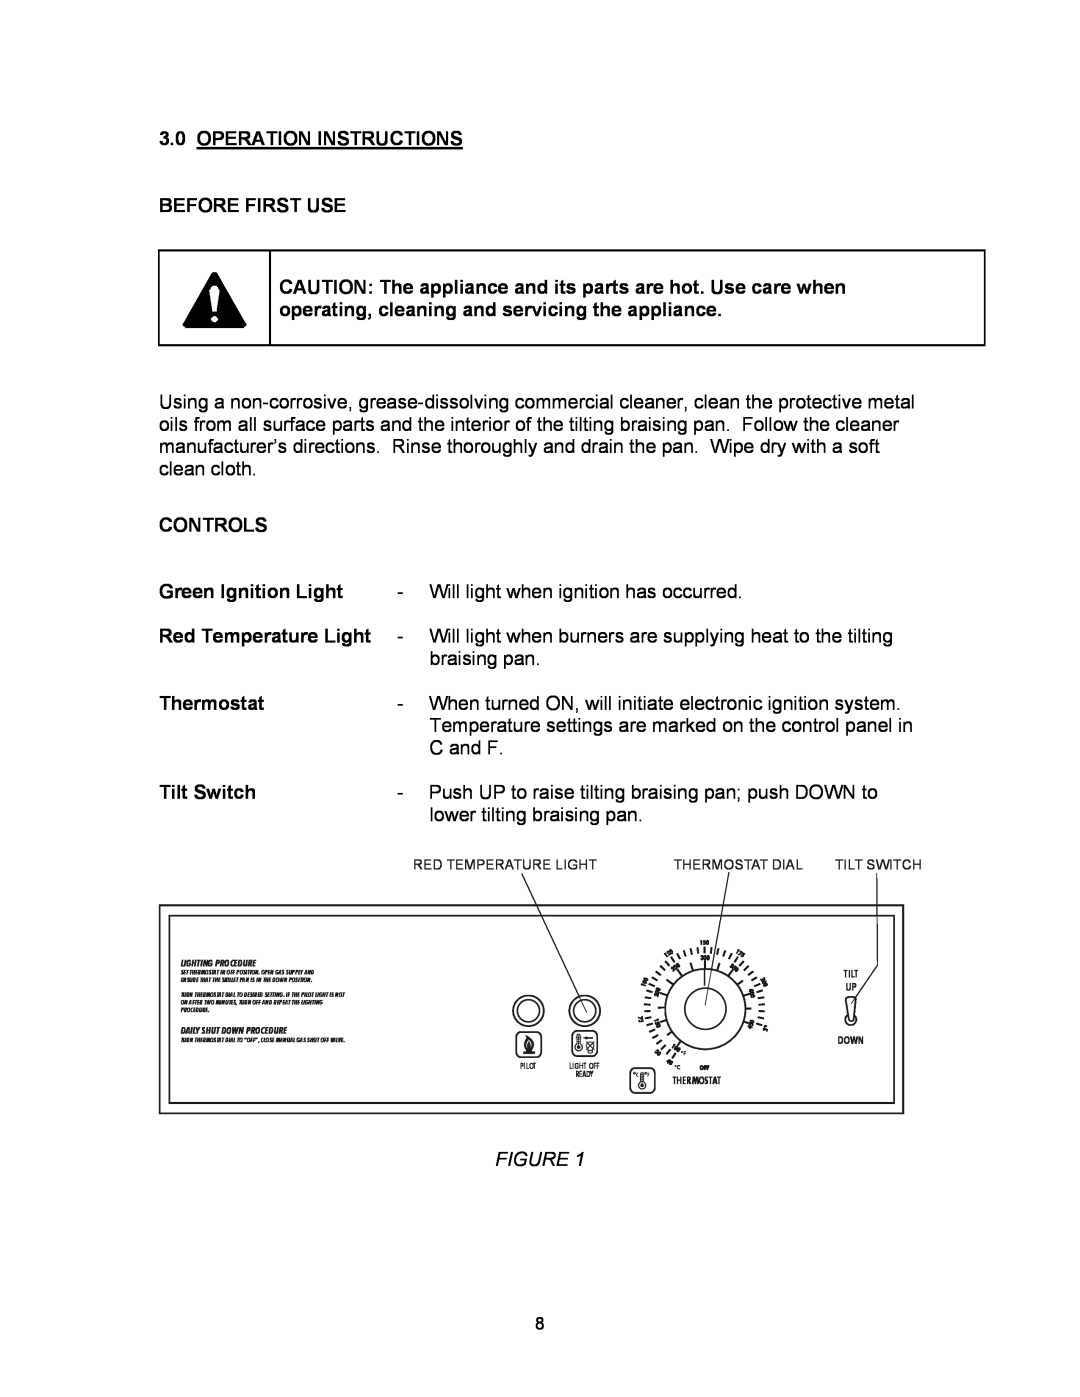 Blodgett BLP-40G manual Operation Instructions Before First Use, Controls, Green Ignition Light, Red Temperature Light 